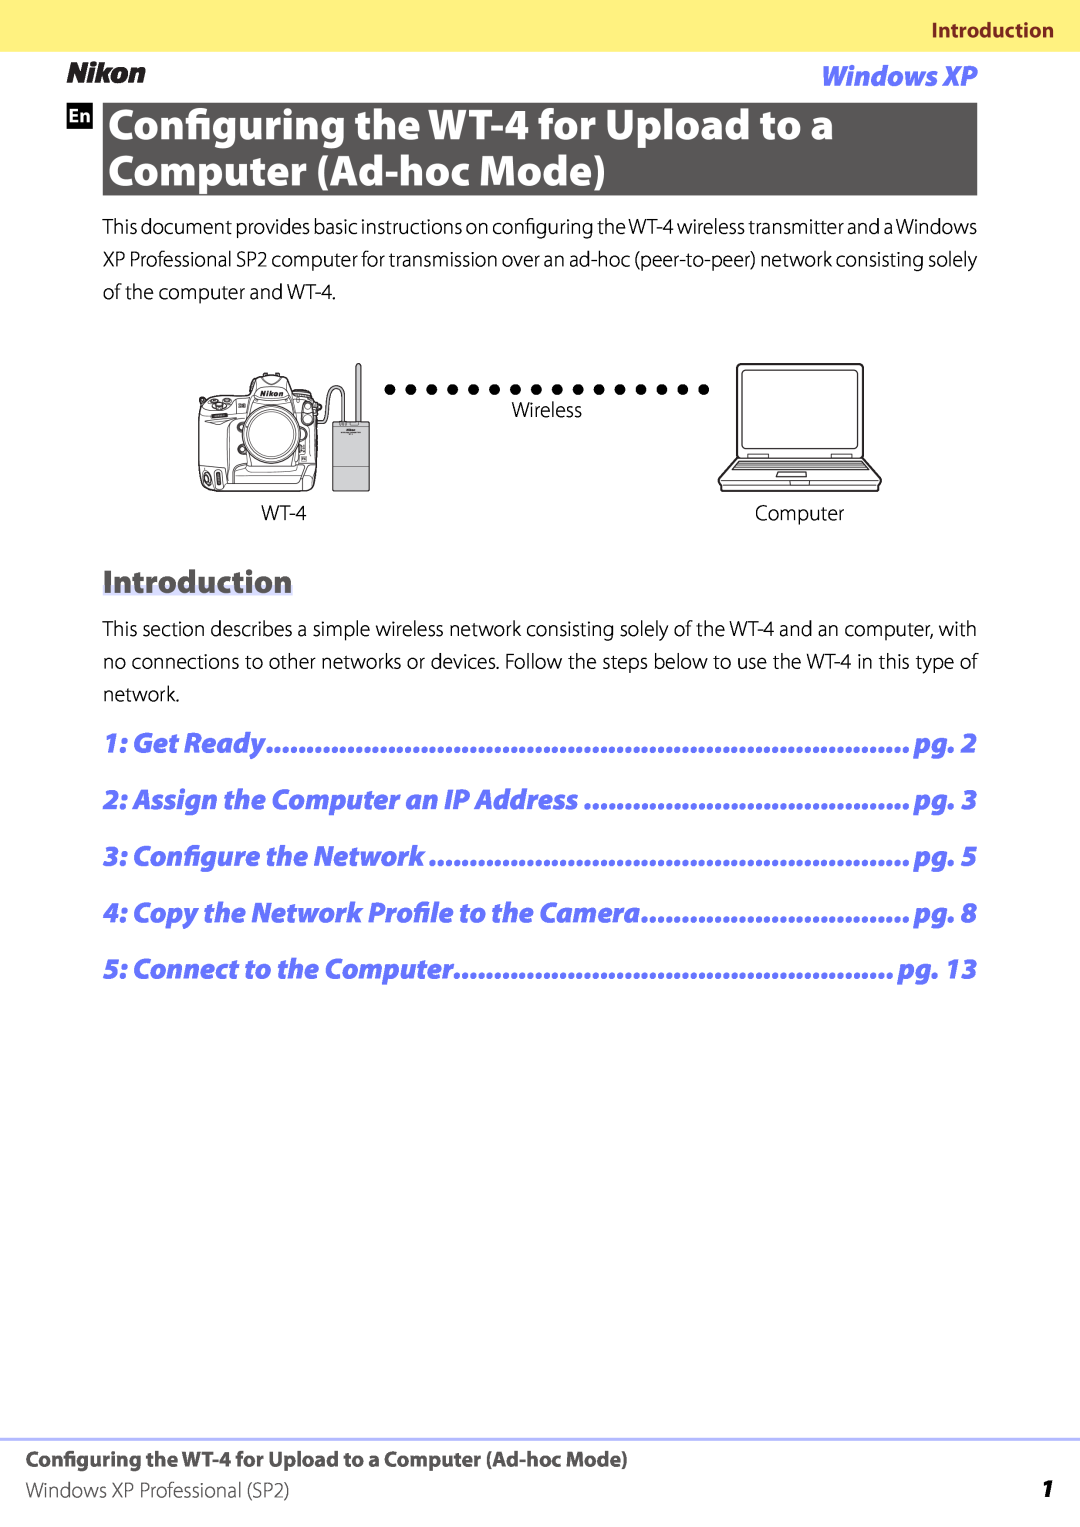 Nikon manual Introduction, Windows XP Professional SP2, En Configuring the WT-4for Upload to a, Computer Ad-hocMode 